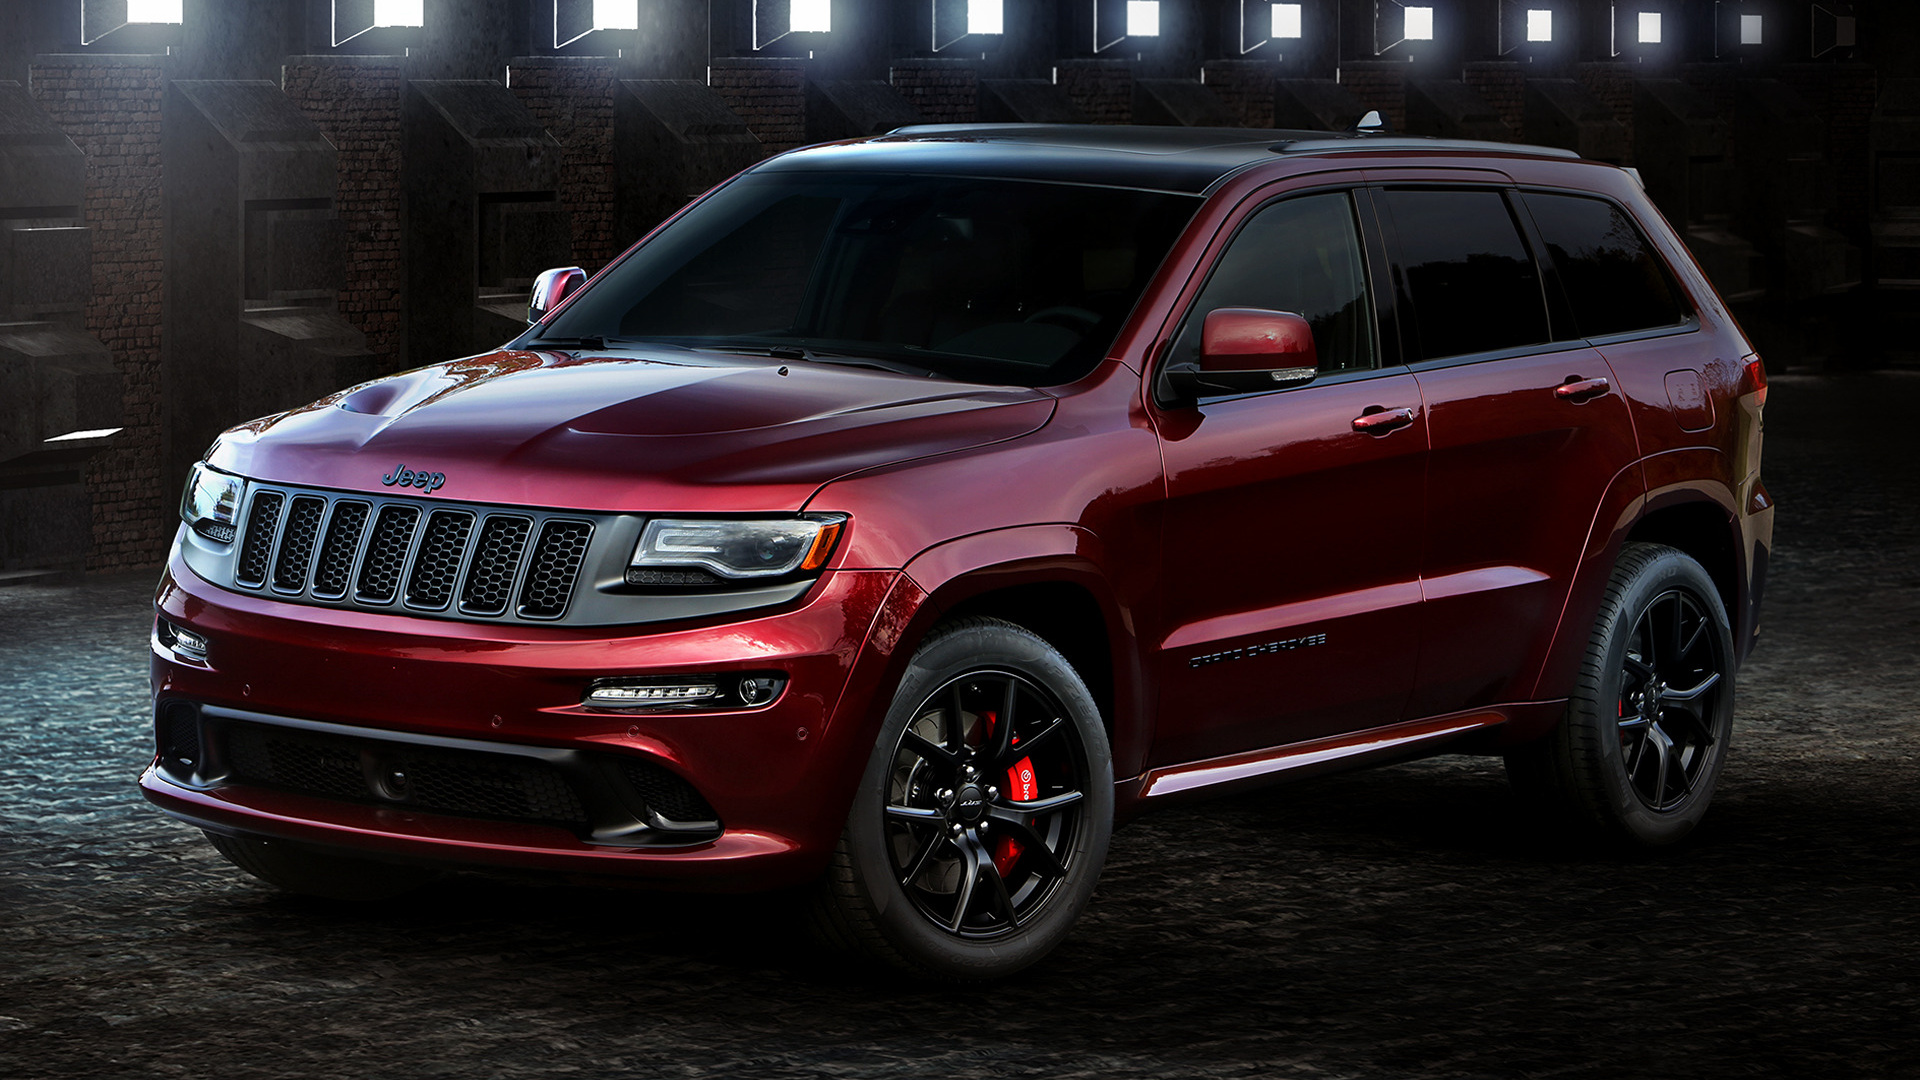 Jeep Grand Cherokee SRT Night (2016) Wallpapers and HD Images - Car Pixel